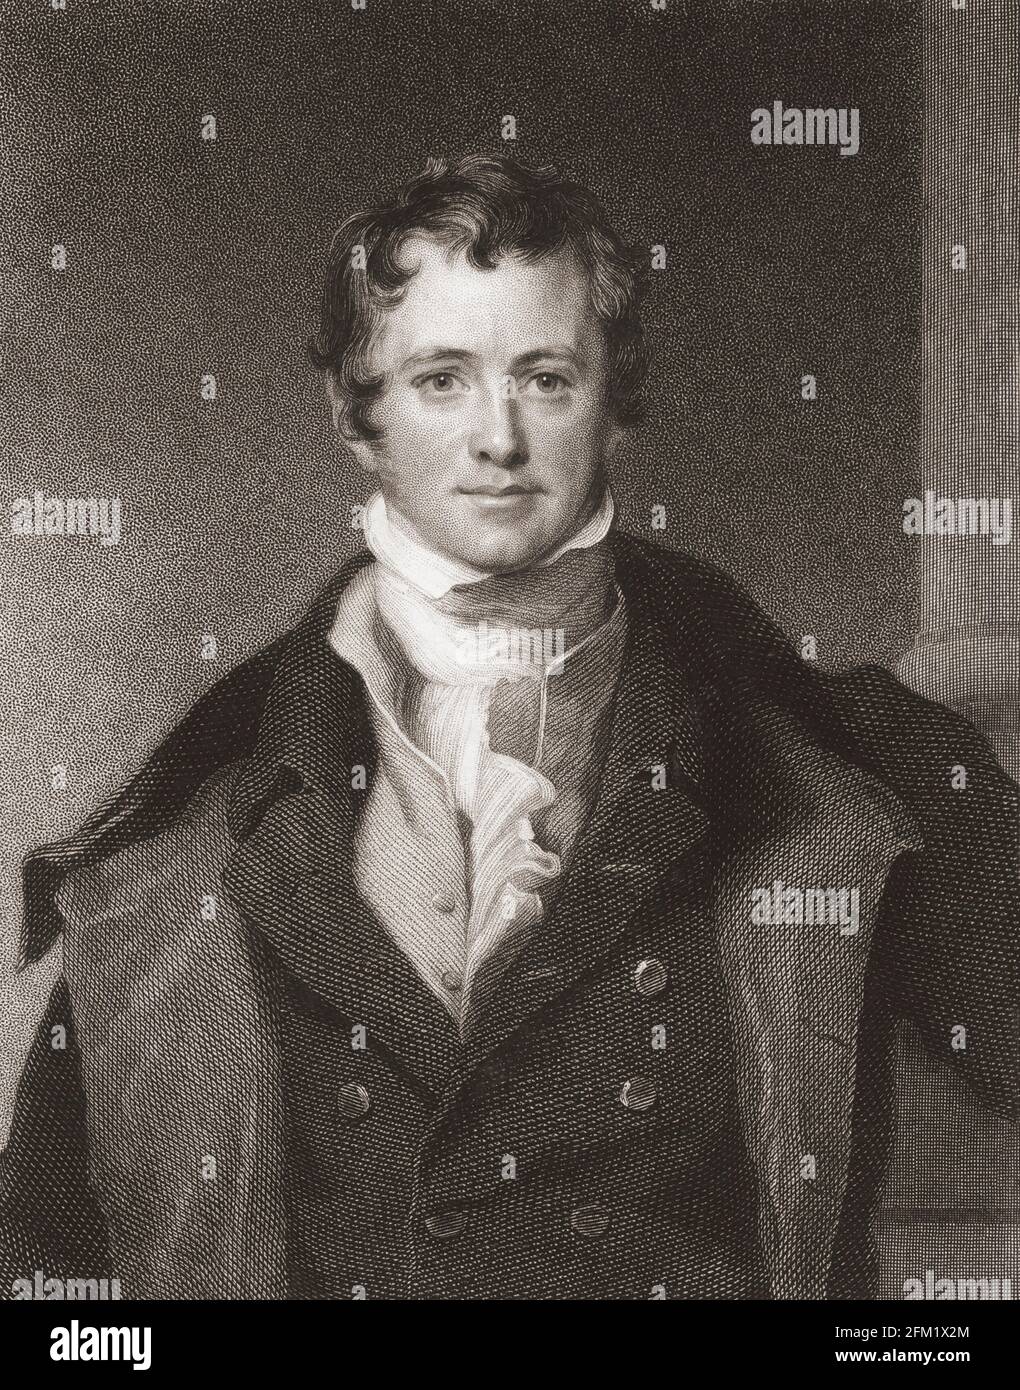 Sir Humphry Davy, 1st Baronet, 1778 - 1829. English chemist and inventor of the Davy lamp. President of the Royal Society.  After a 19th century work by William Henry Worthington, after Sir Thomas Lawrence. Stock Photo